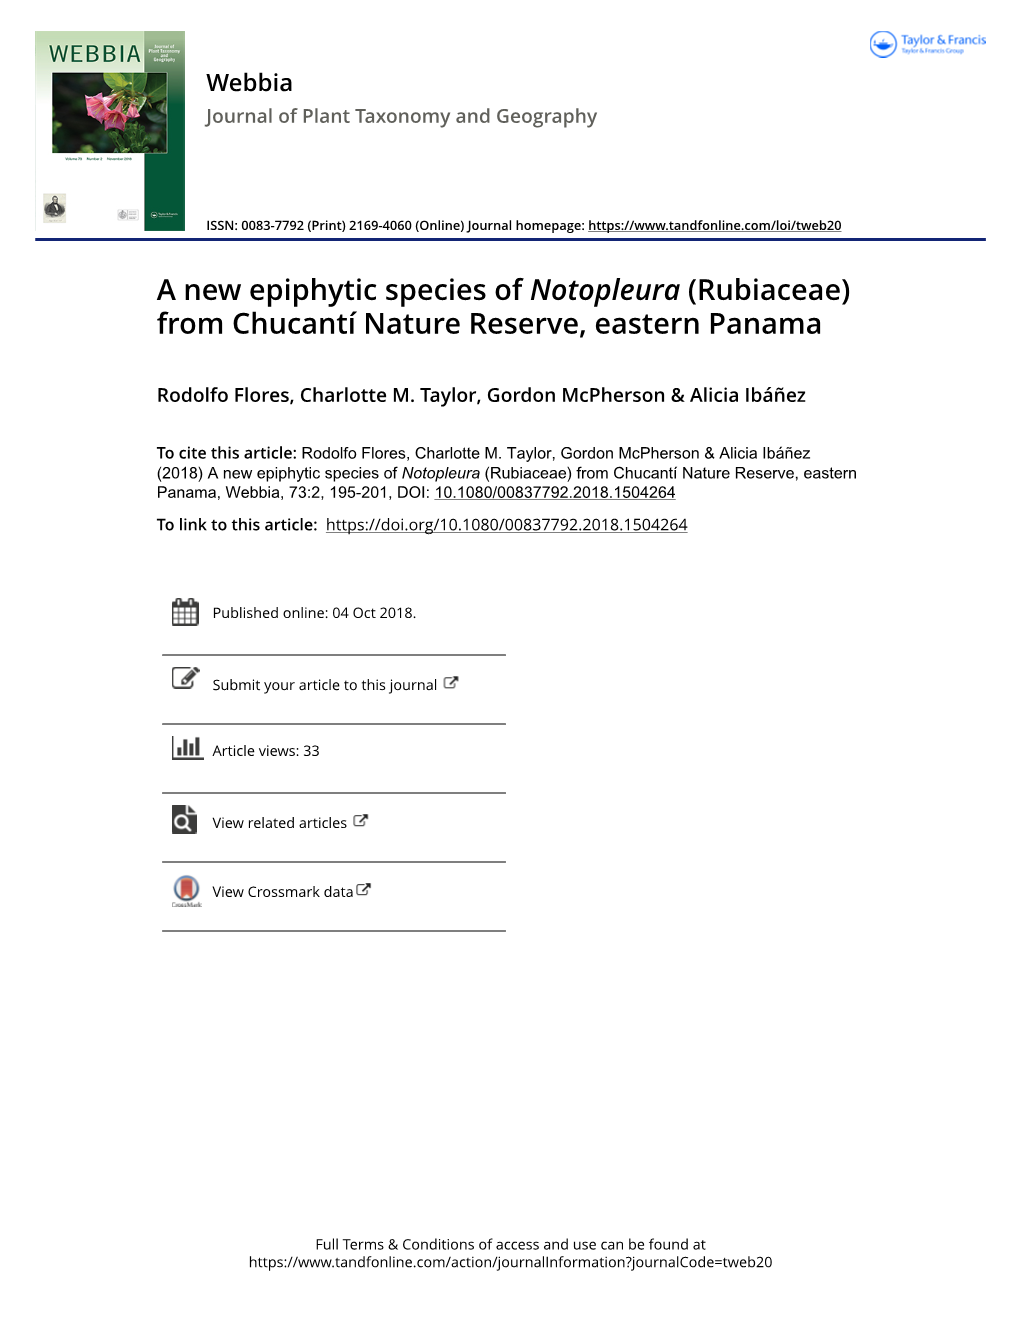 A New Epiphytic Species of Notopleura (Rubiaceae) from Chucantí Nature Reserve, Eastern Panama